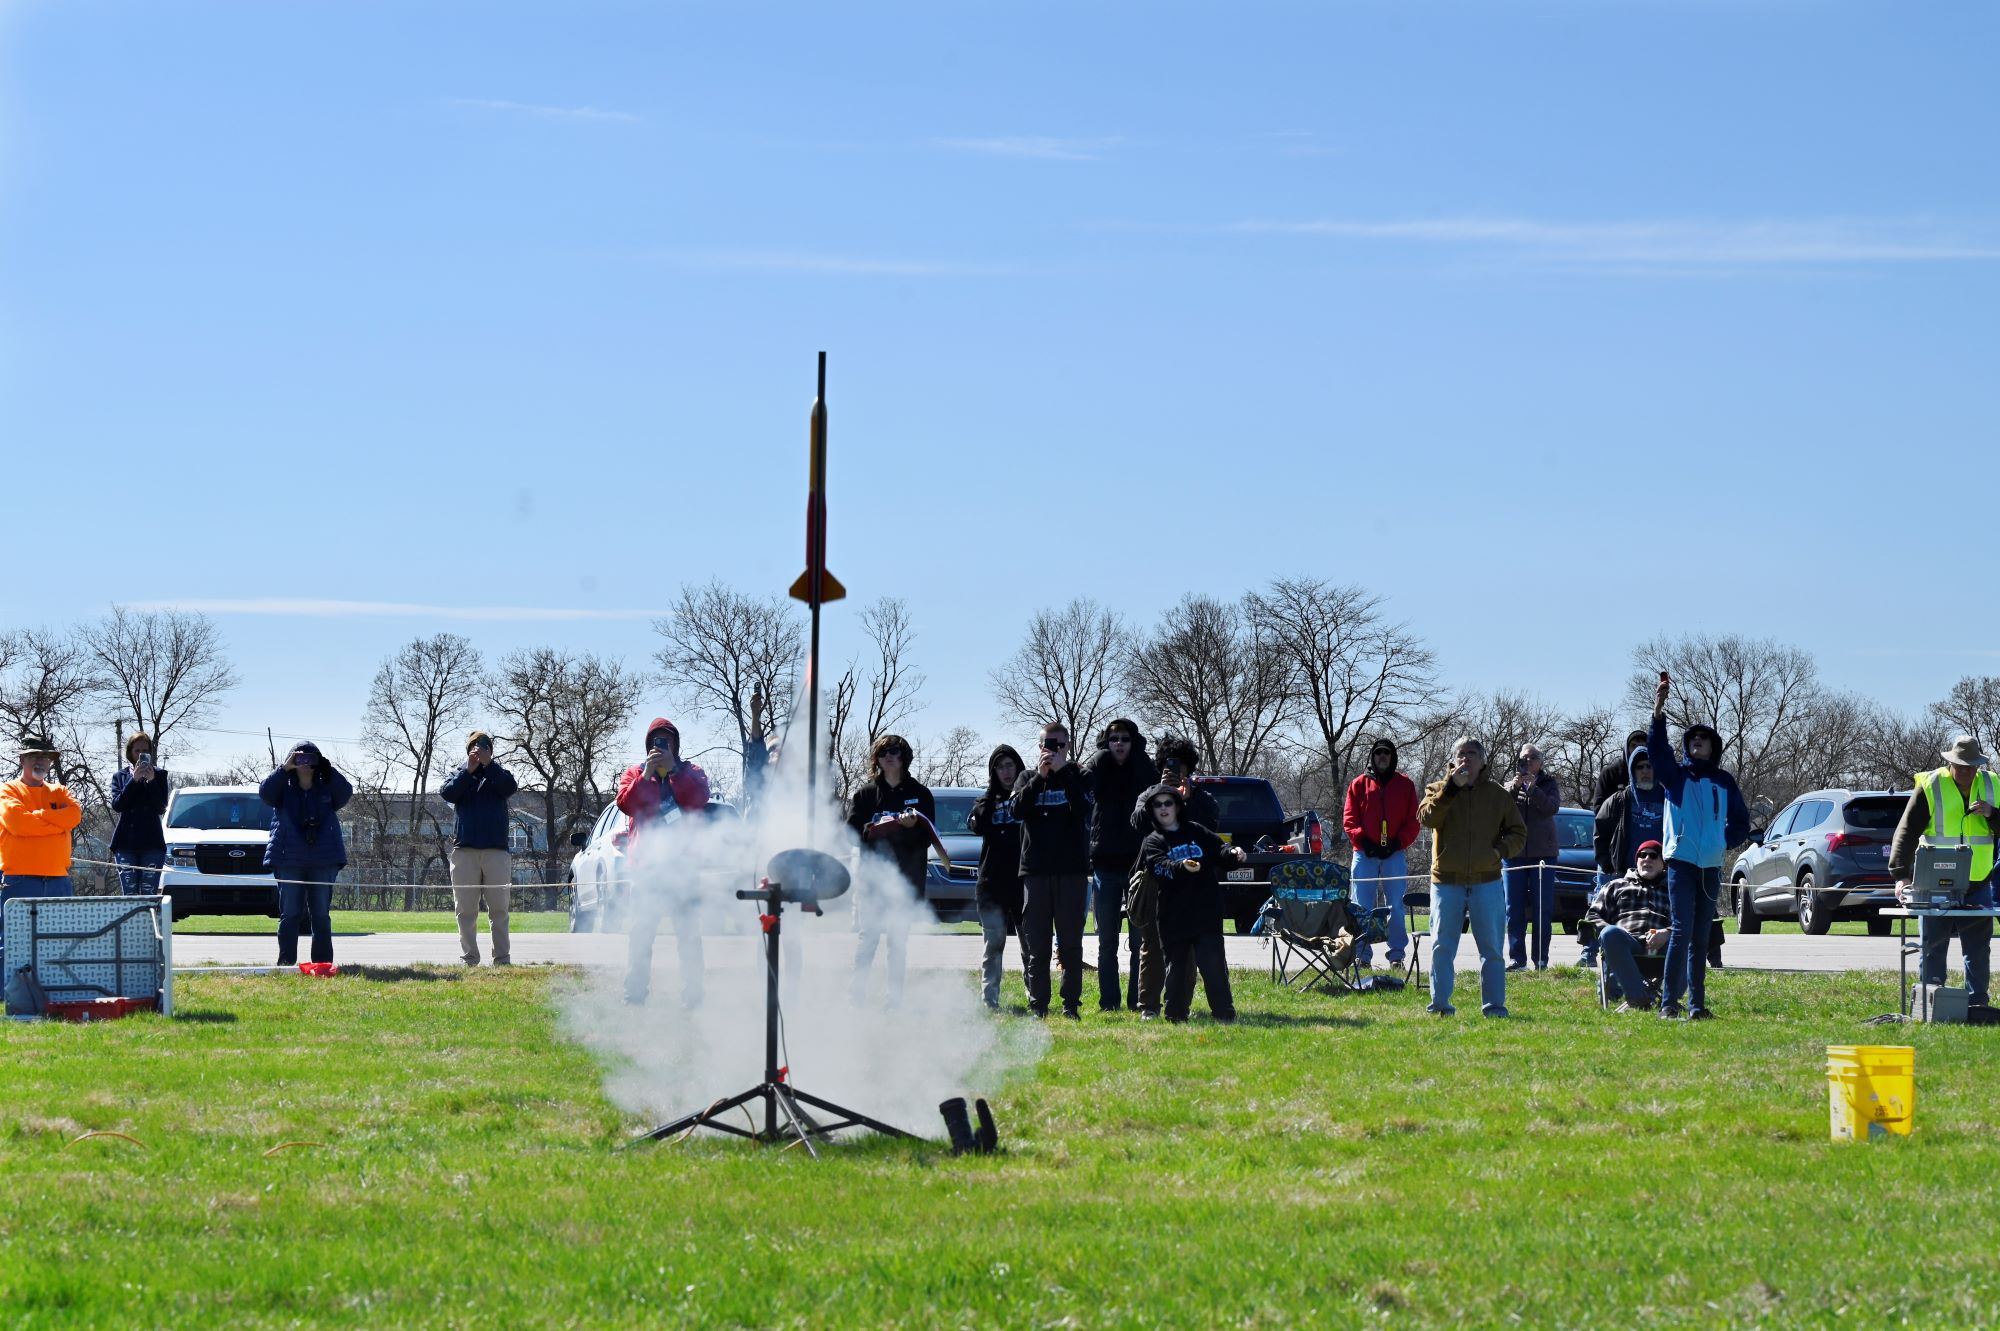 A model rocket is going up to the sky after being launched. A crowd of people stands behind it looking up.